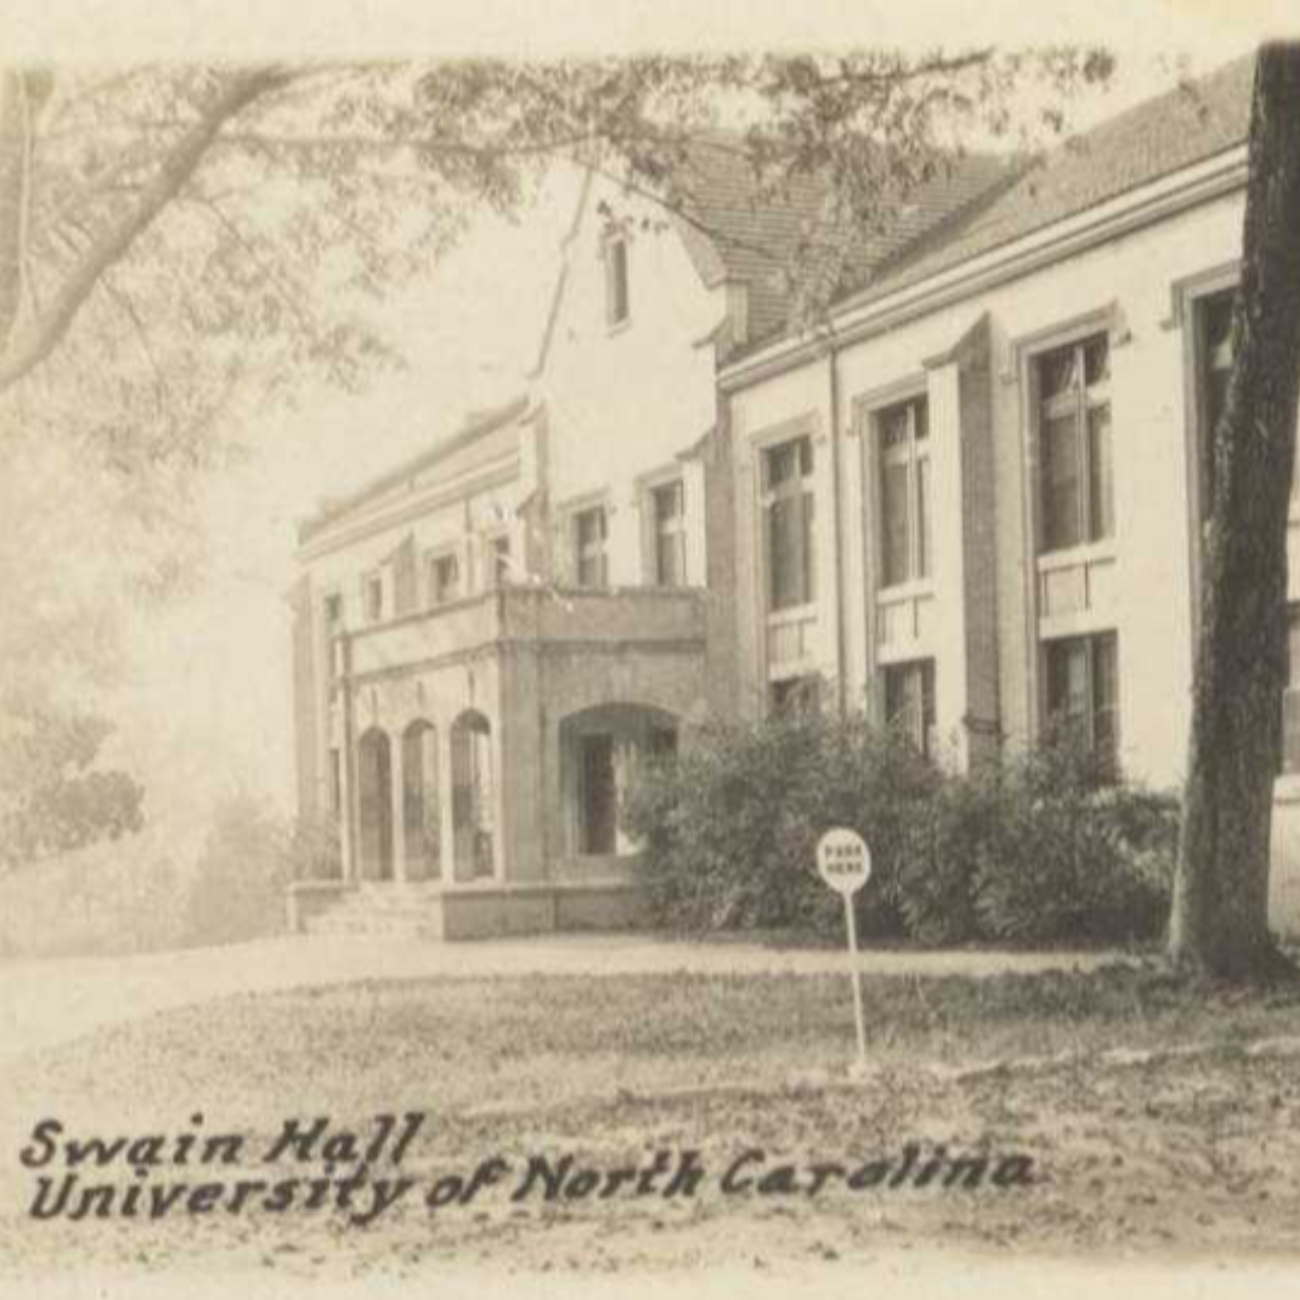 A black and white photo of a University building. 